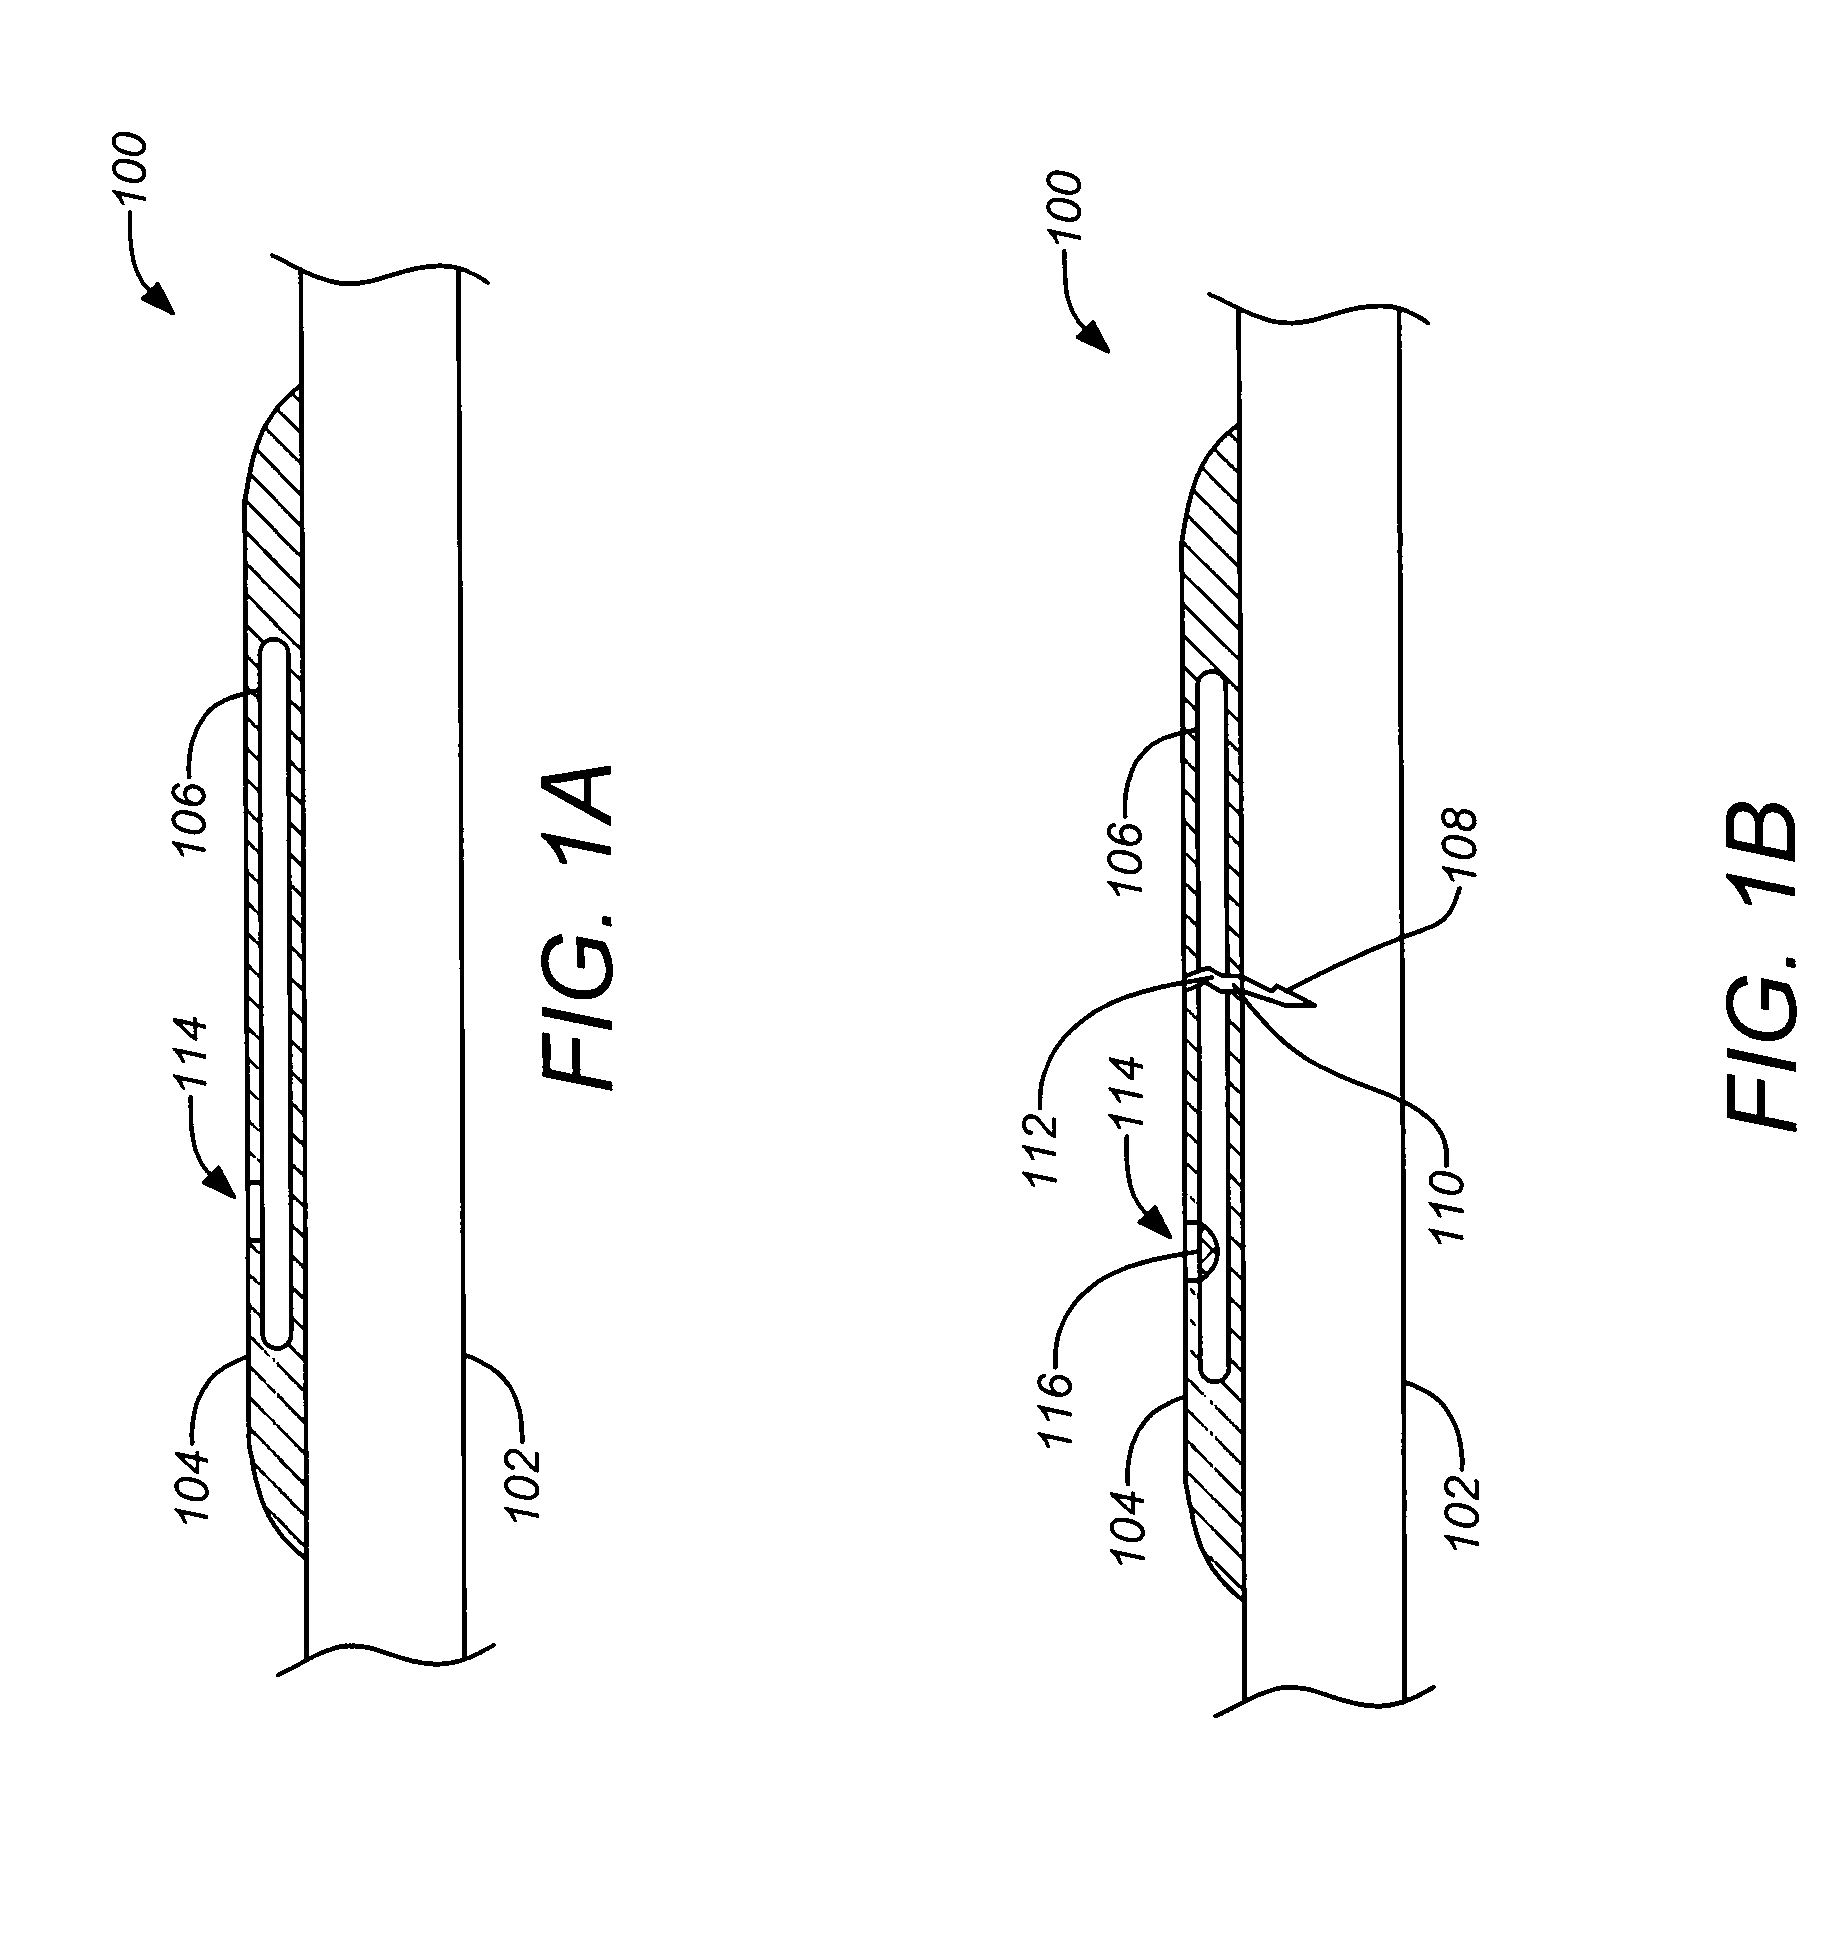 Fracture detecting structural health sensor